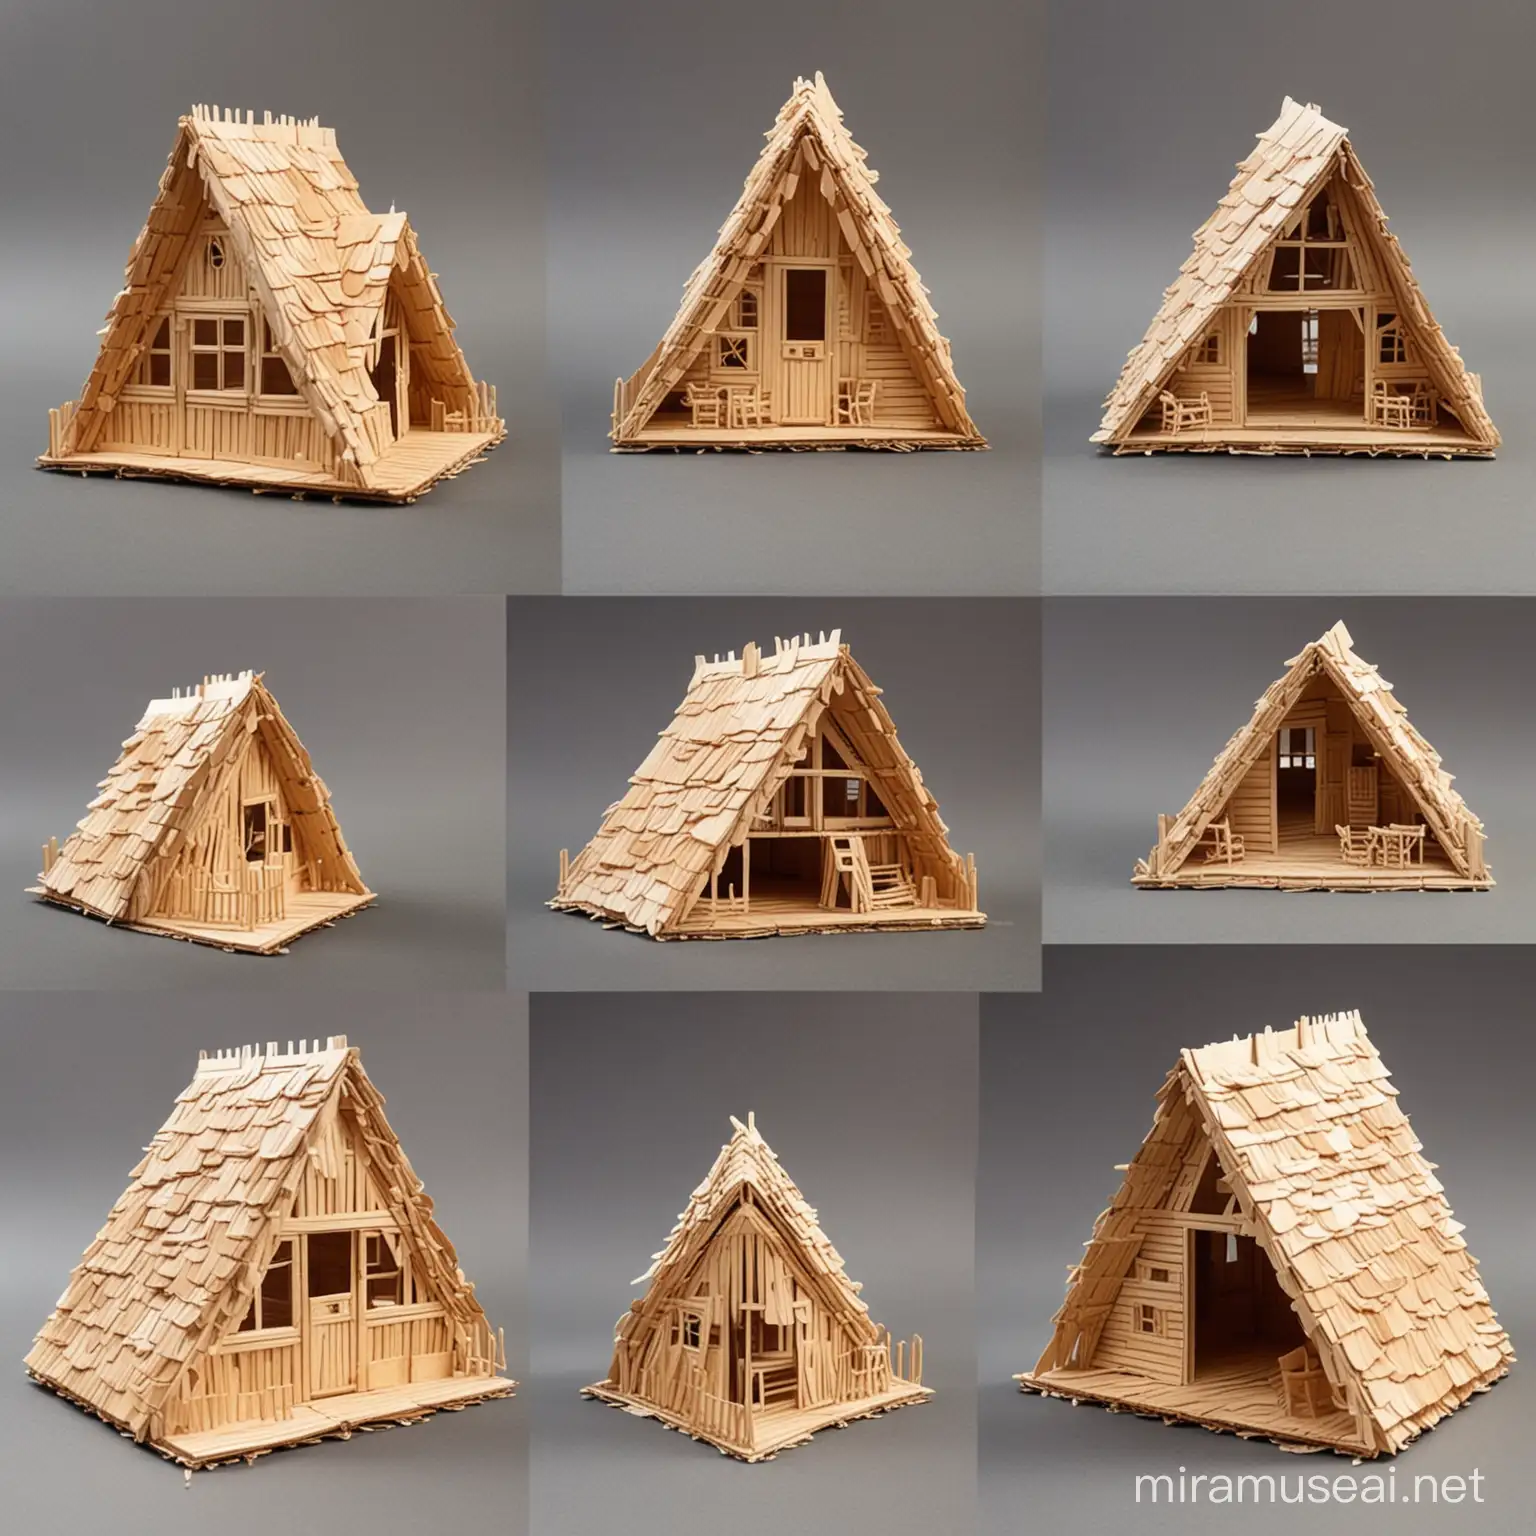 creative triangular cottage exterior made from popsicle sticks. architectural house. Show different sides ; front, side and back views.